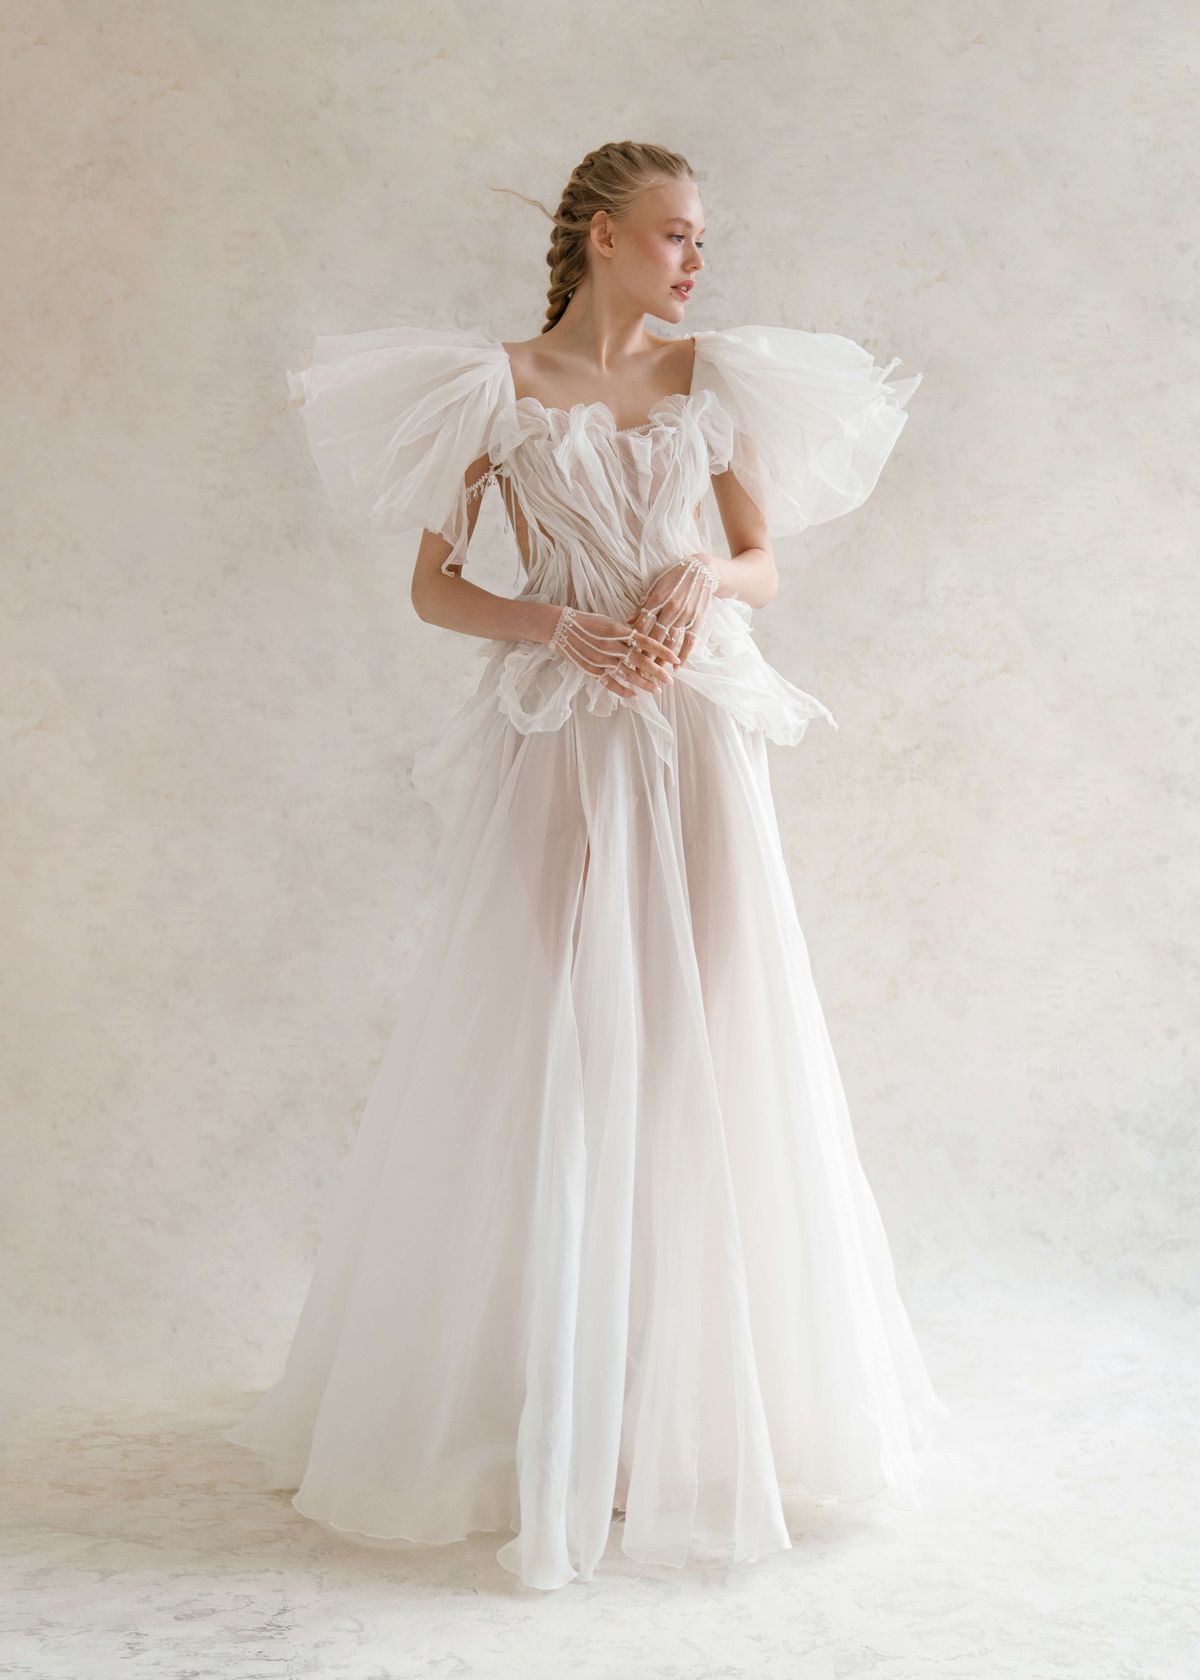 Rara Avis new trend wedding dress Minerale with detachable sleeves at Dell'Amore Bridal, NZ. 8